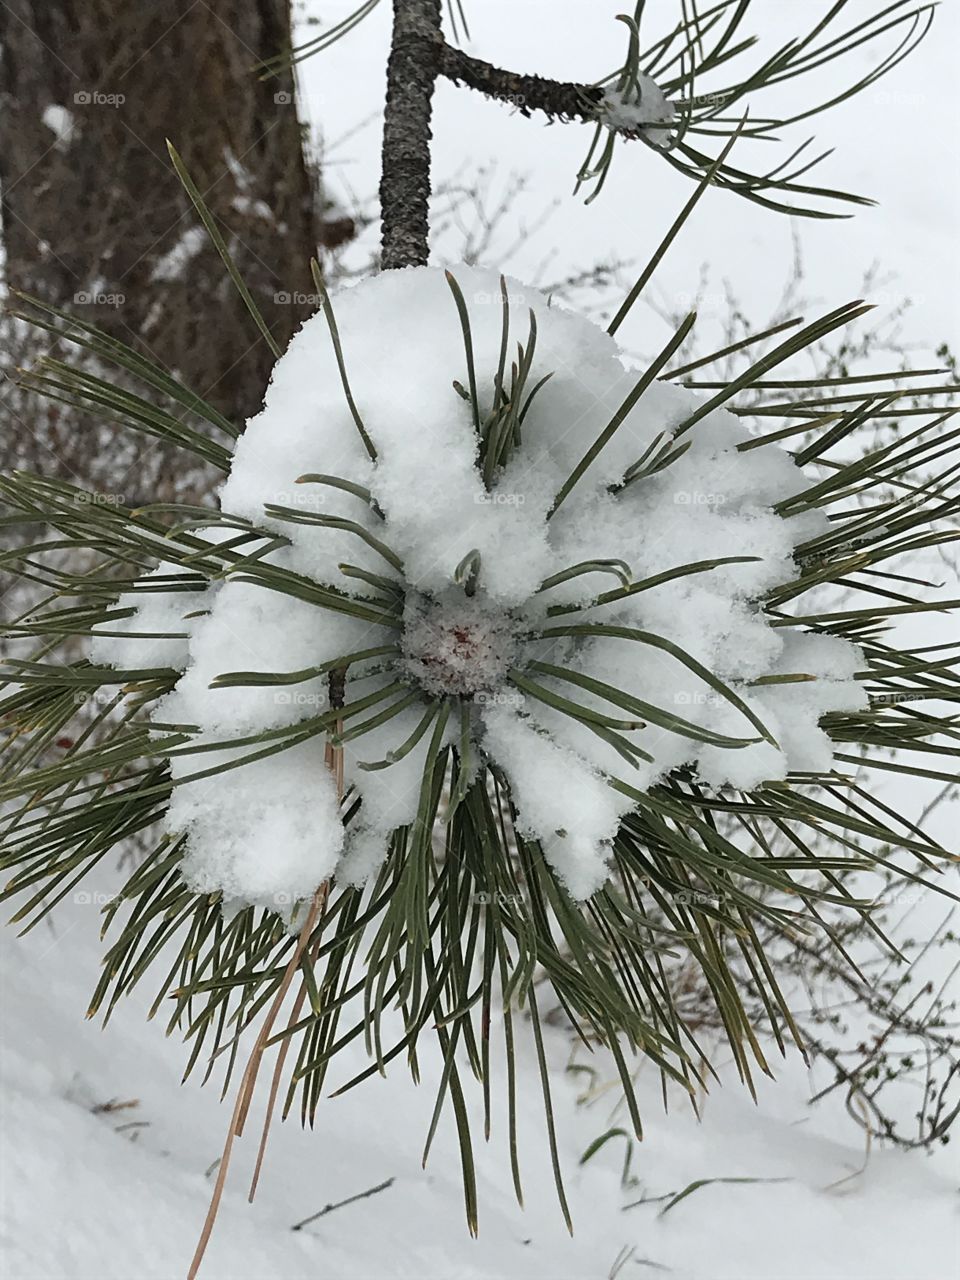 Snow collecting on the pines